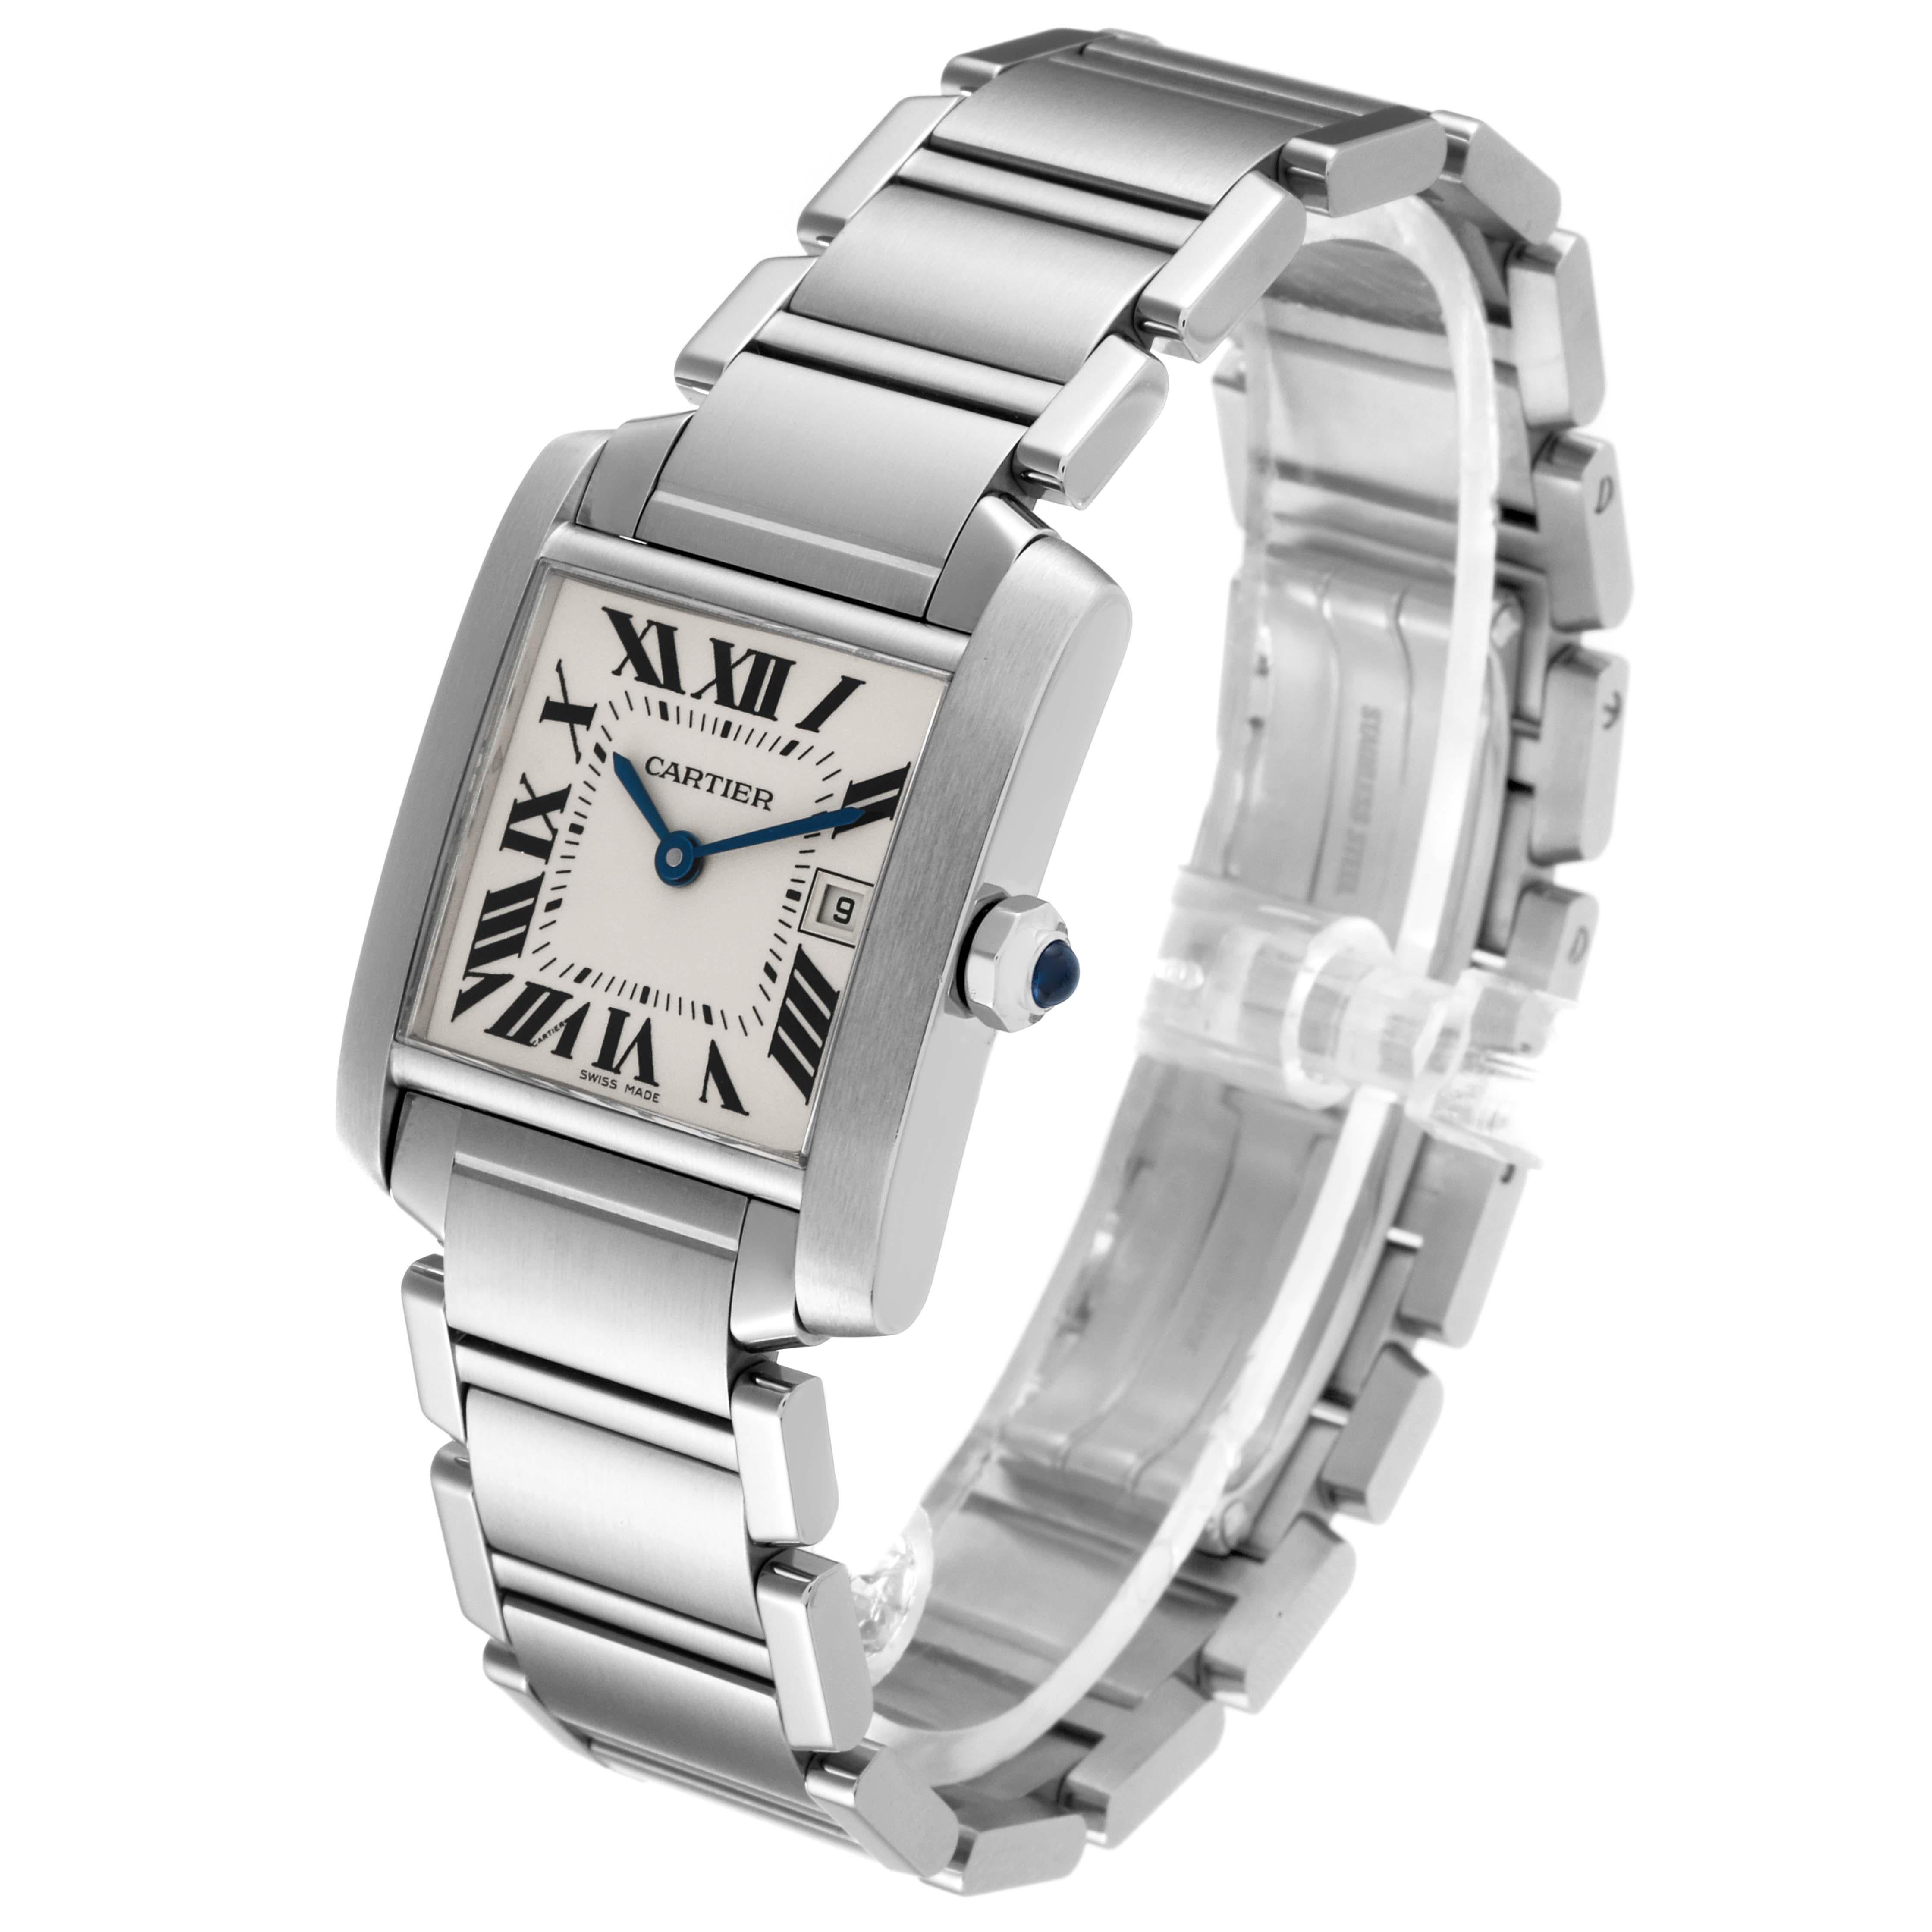 Cartier Tank Francaise Midsize Steel Ladies Watch W51011Q3 Box Papers In Excellent Condition For Sale In Atlanta, GA